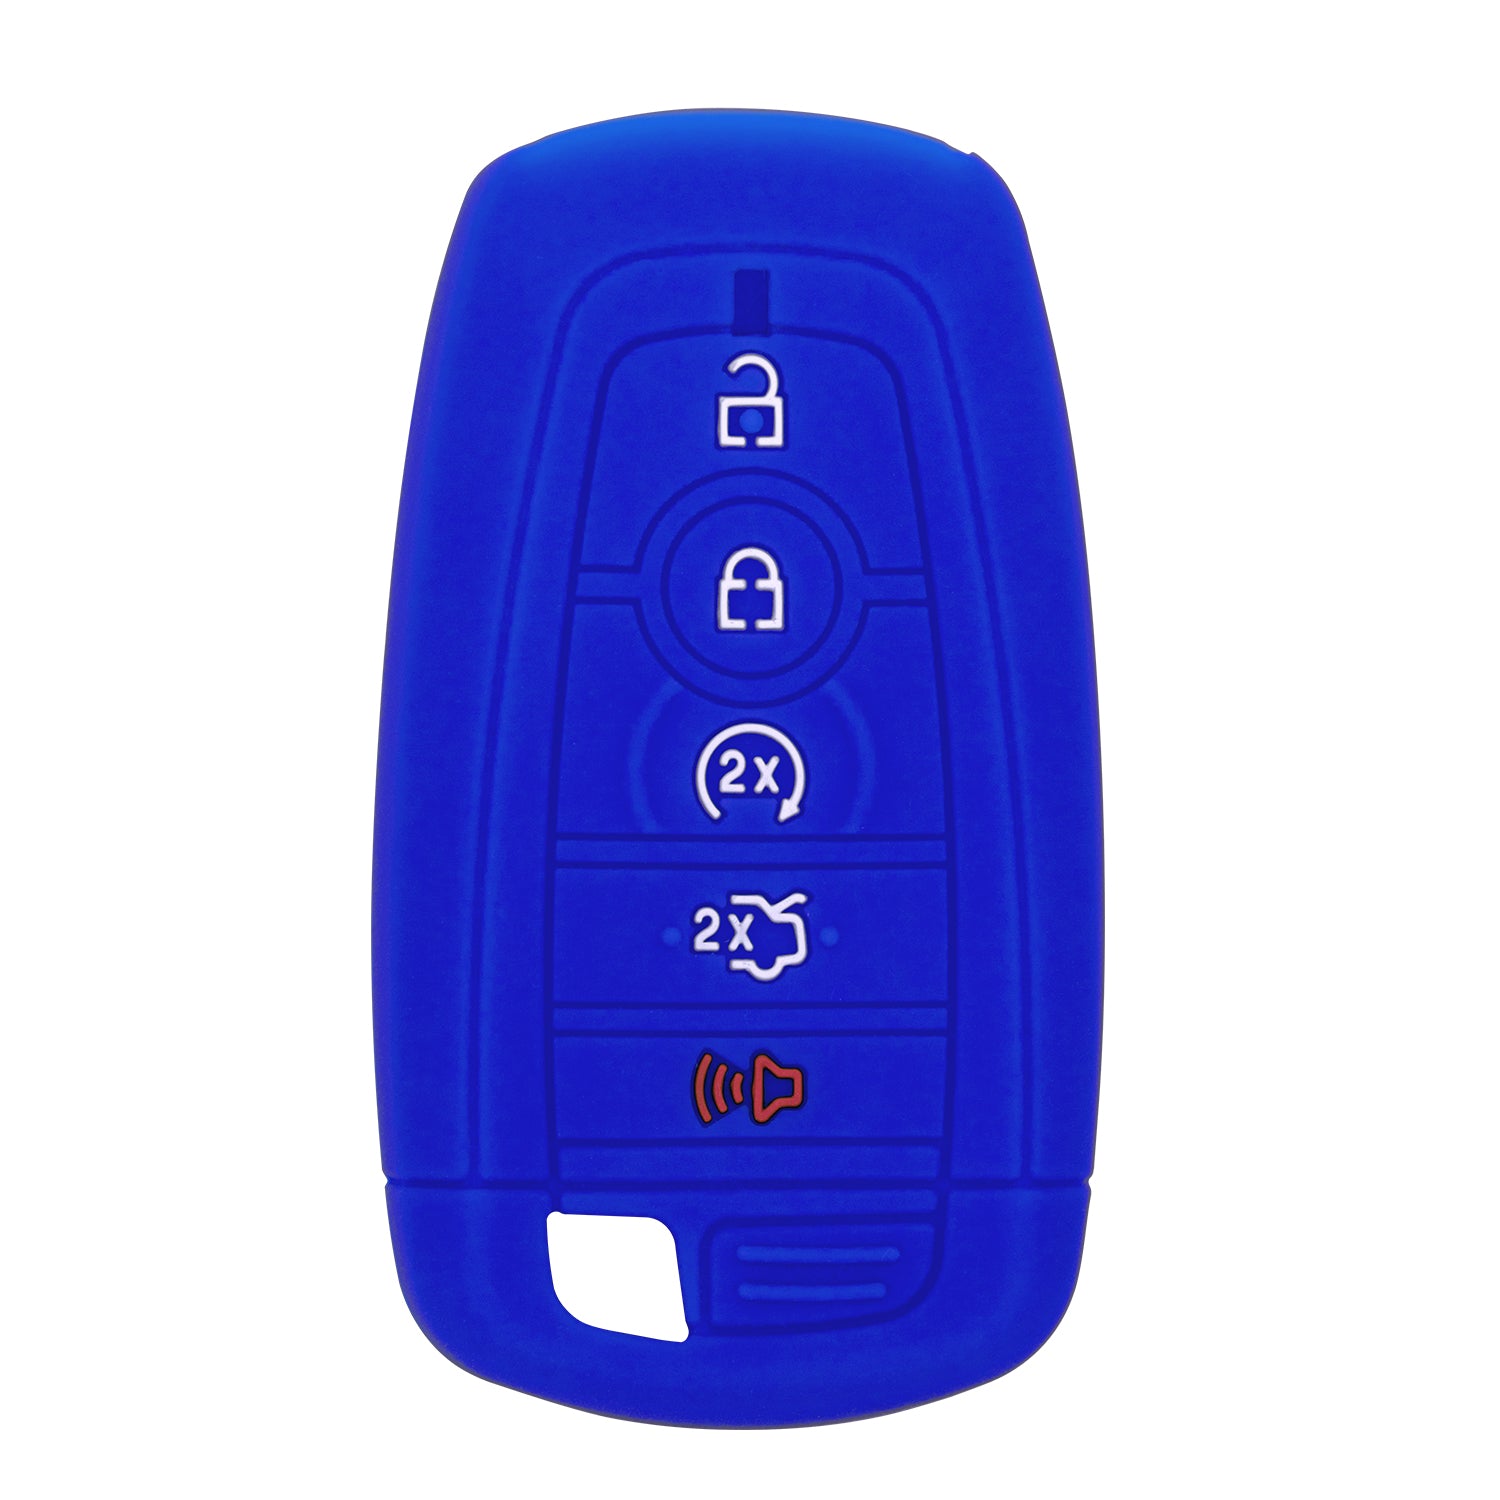 Silicone Case for Smart Key Remote Keyless Entry for Ford Fusion Explorer Edge Mustang Expedition M3N-A2C93142600 164-R8149 164R8149 R8149 (Blue)